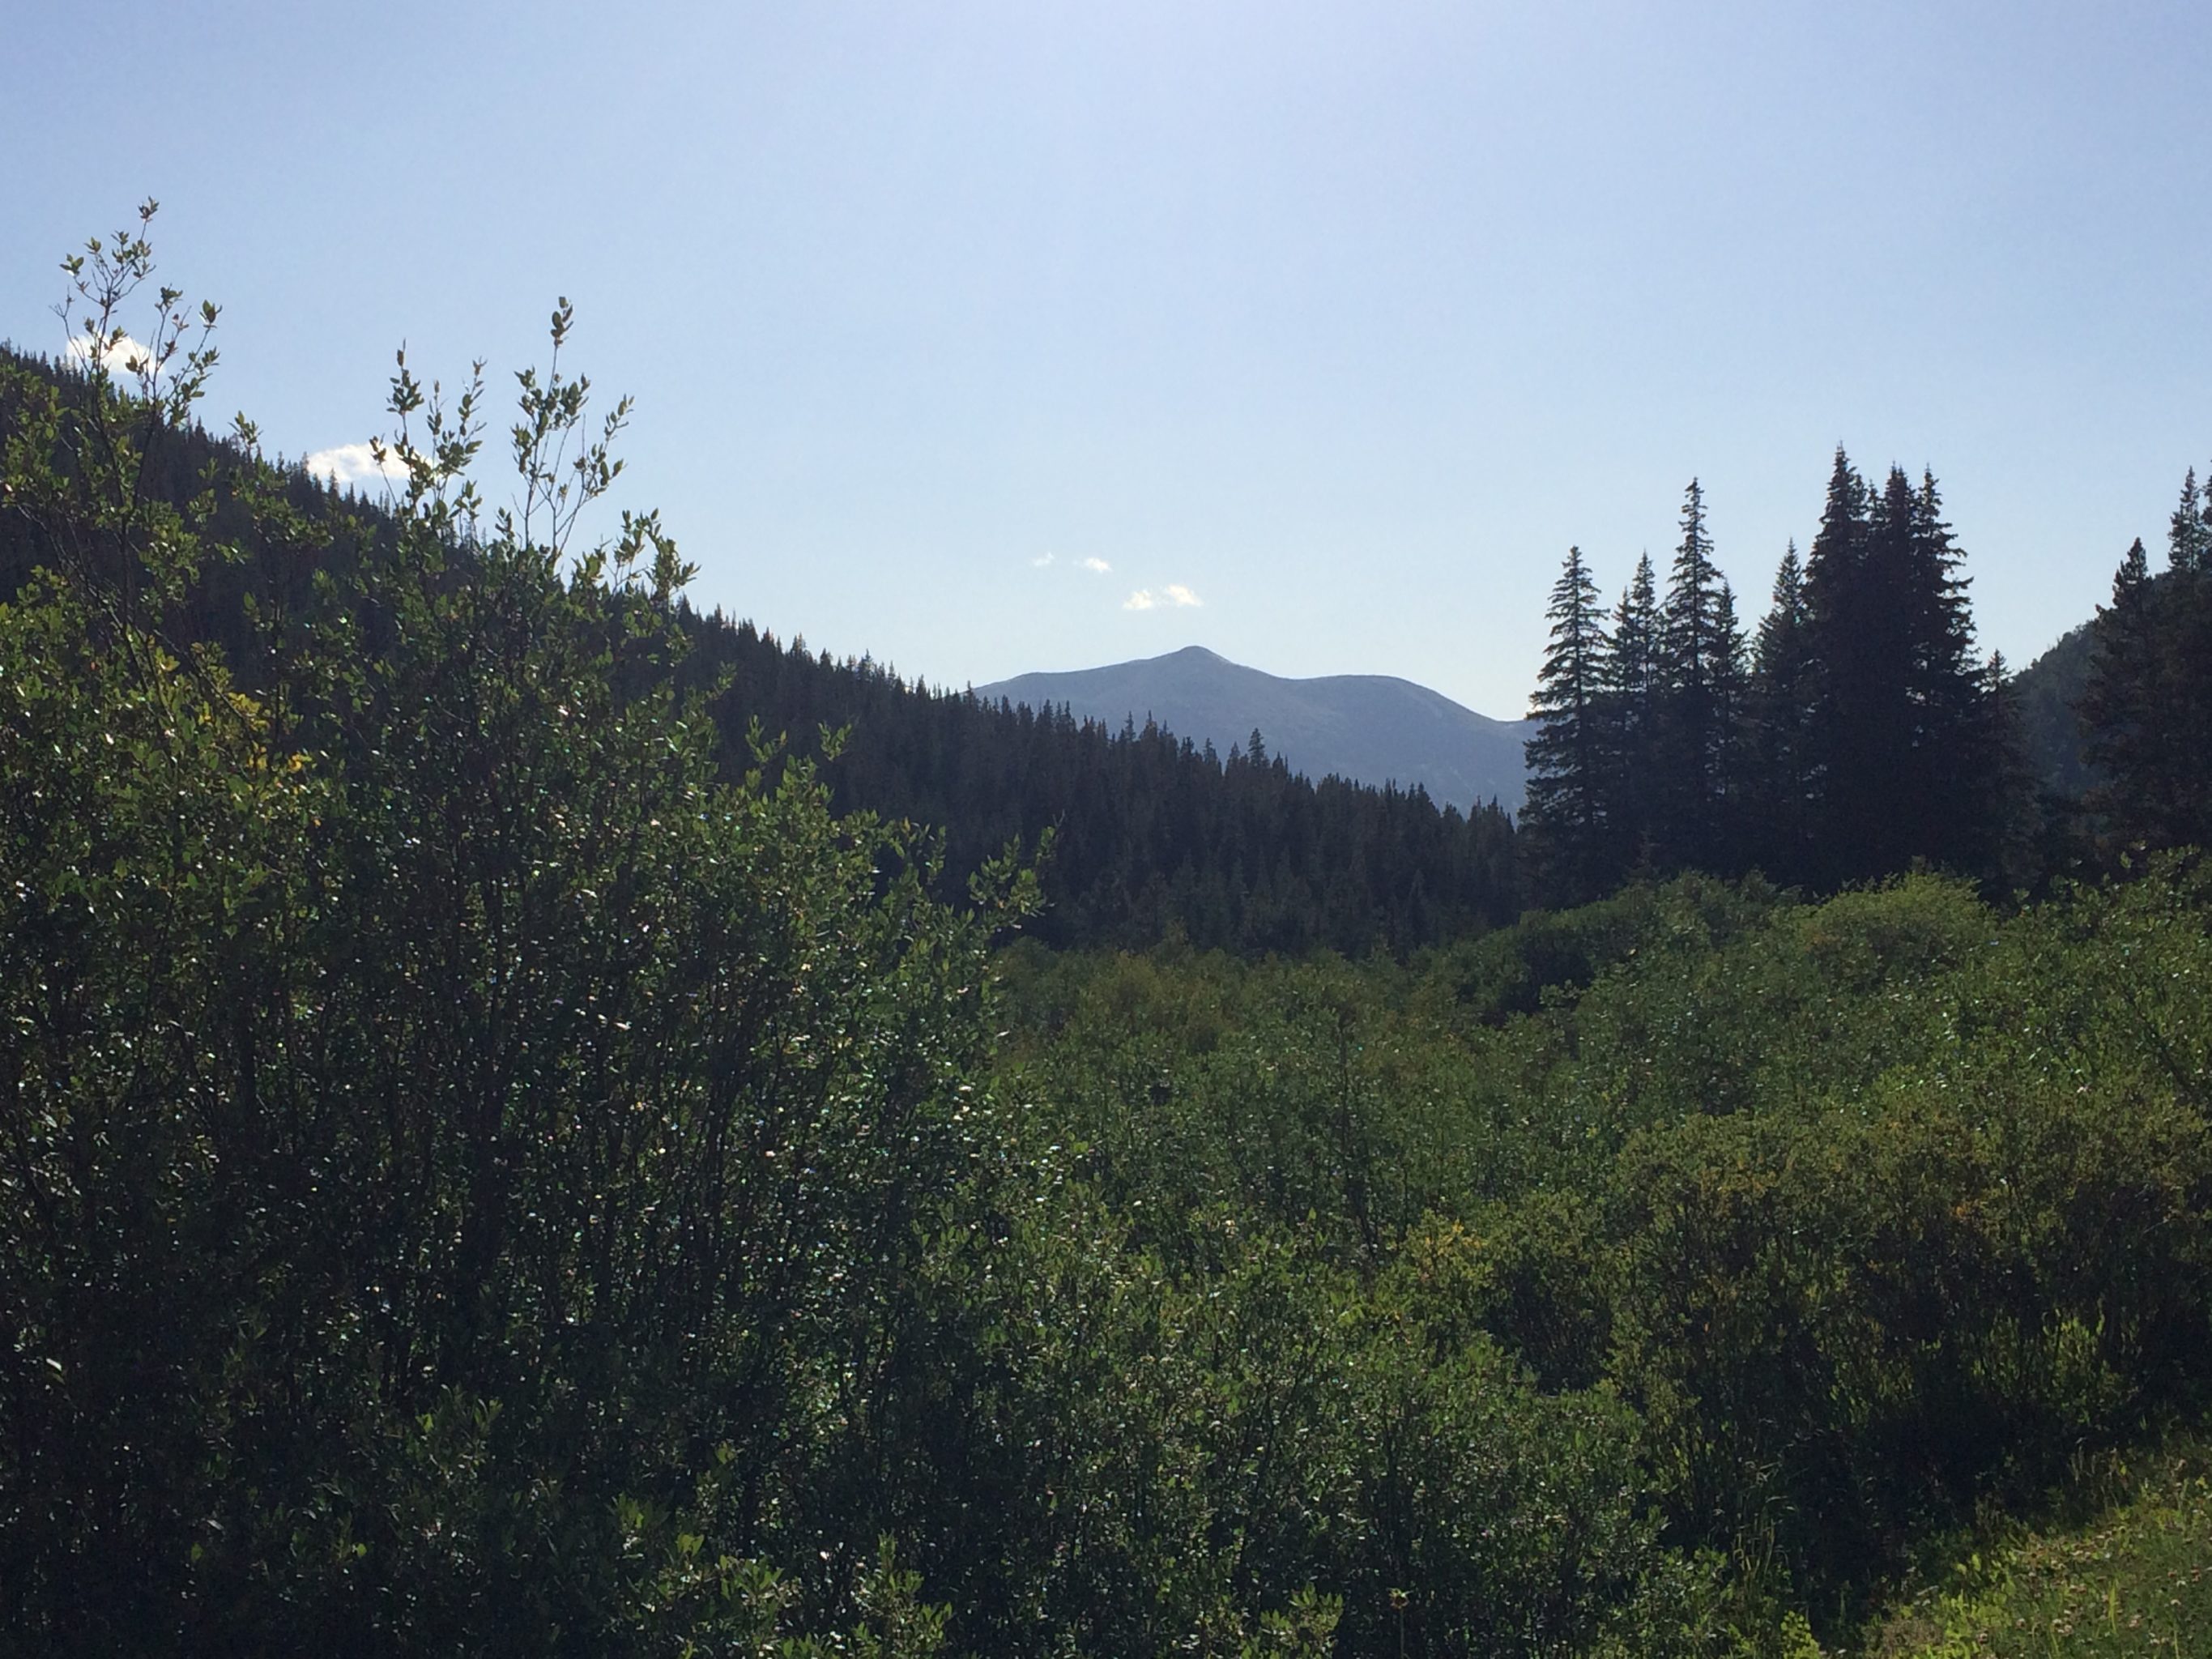 View of greenery and mountains in the French Gulch area of Breckenridge, CO